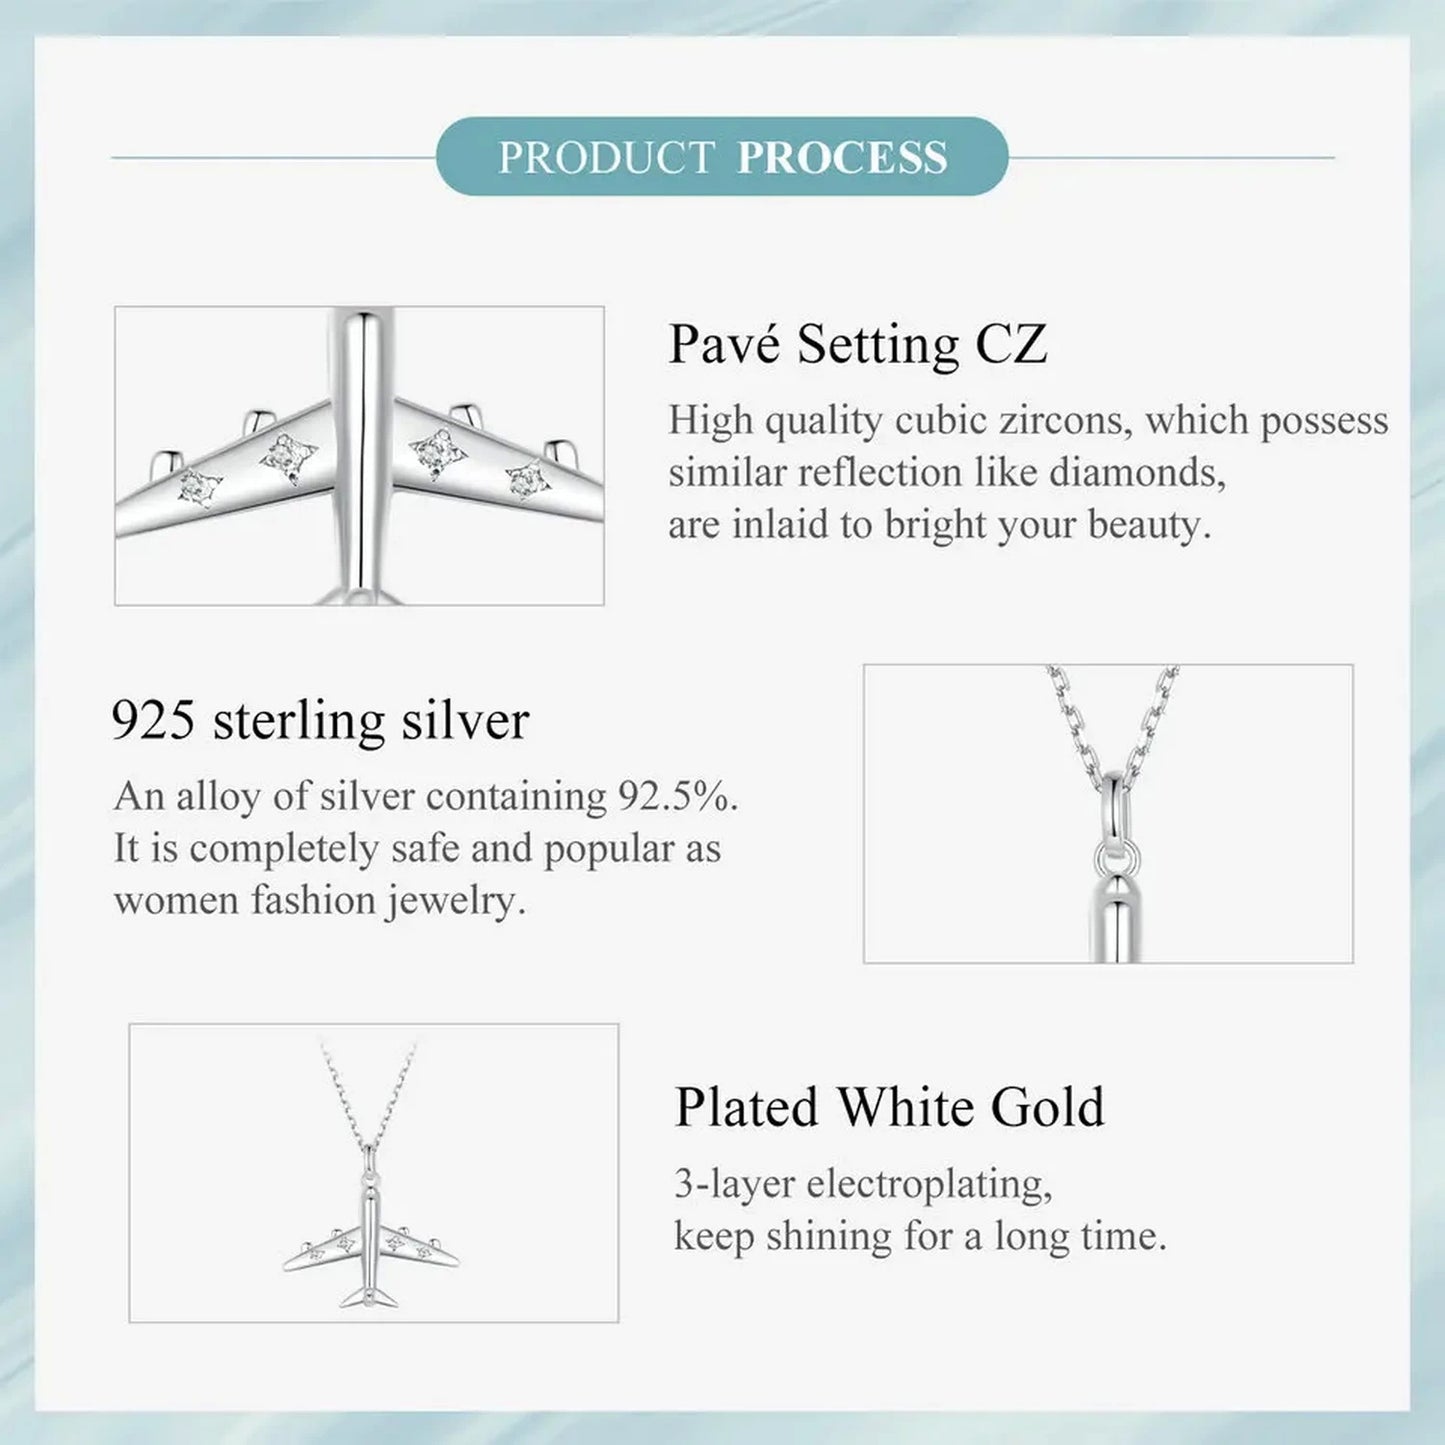 PAHALA 925 Strling Silver Delicate Airplane Travel With Crystals Pendant Necklace